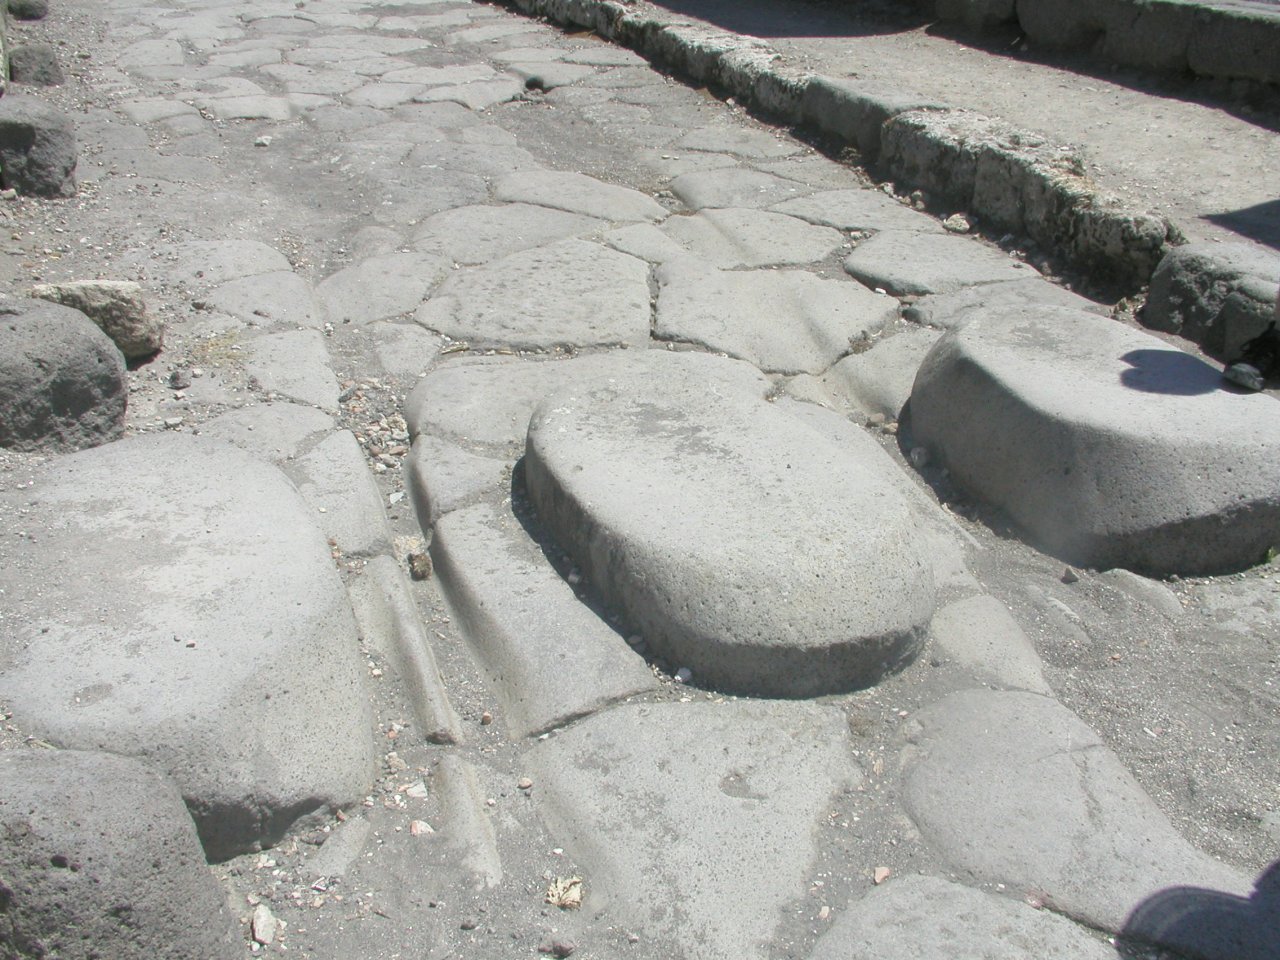 JPEG image - Pompei : the ruts made by cart wheels are very evident in some places on the roads. ...